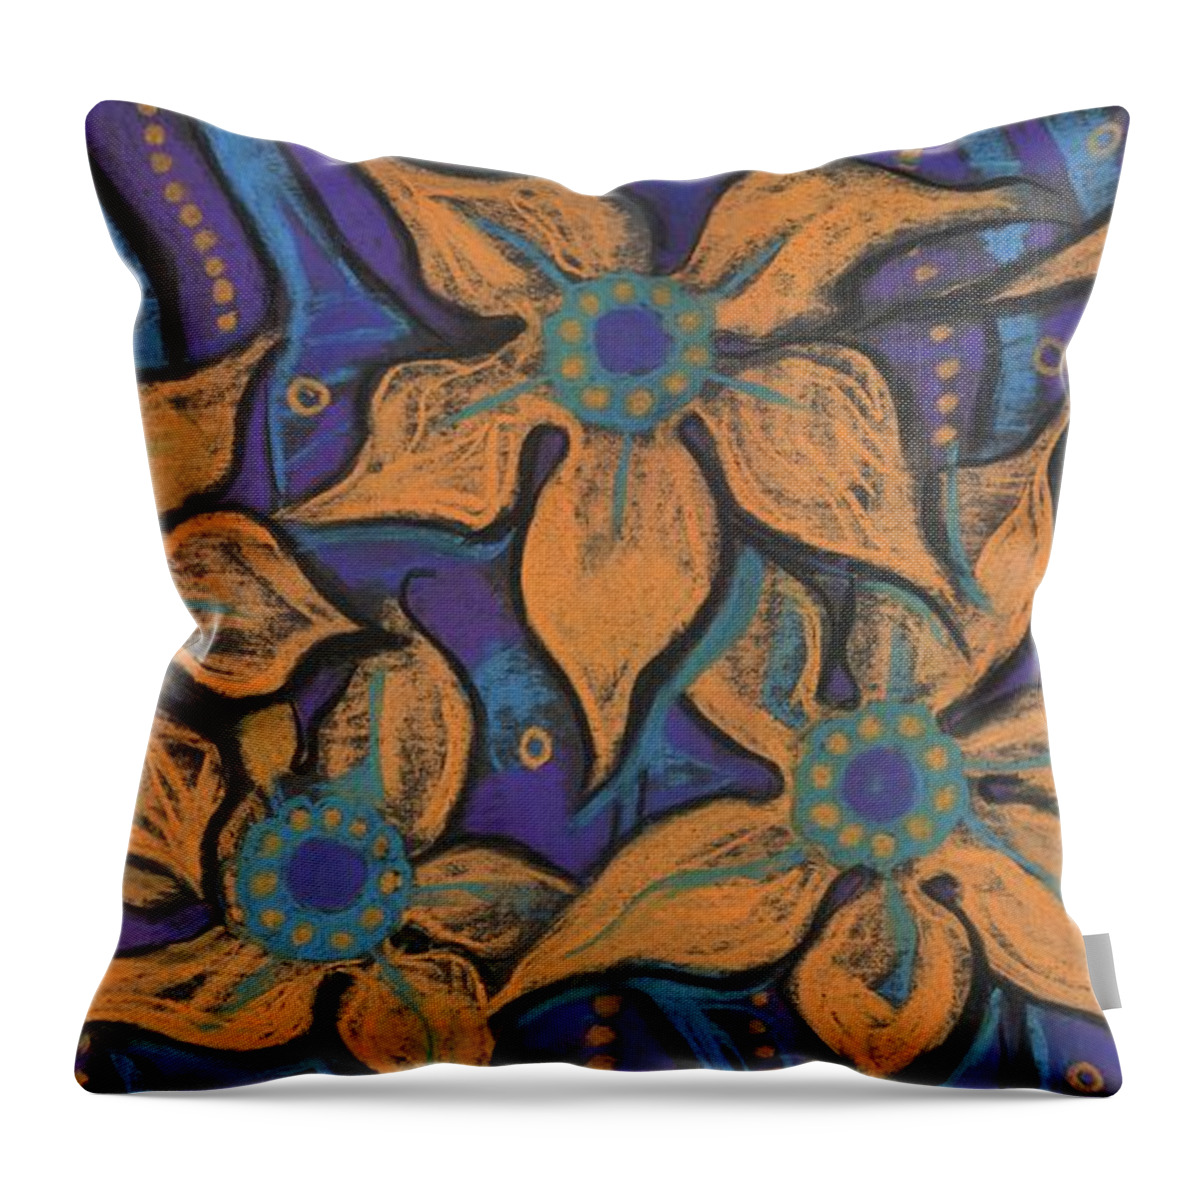 Flower Throw Pillow featuring the painting Golden Flowers by Julia Khoroshikh